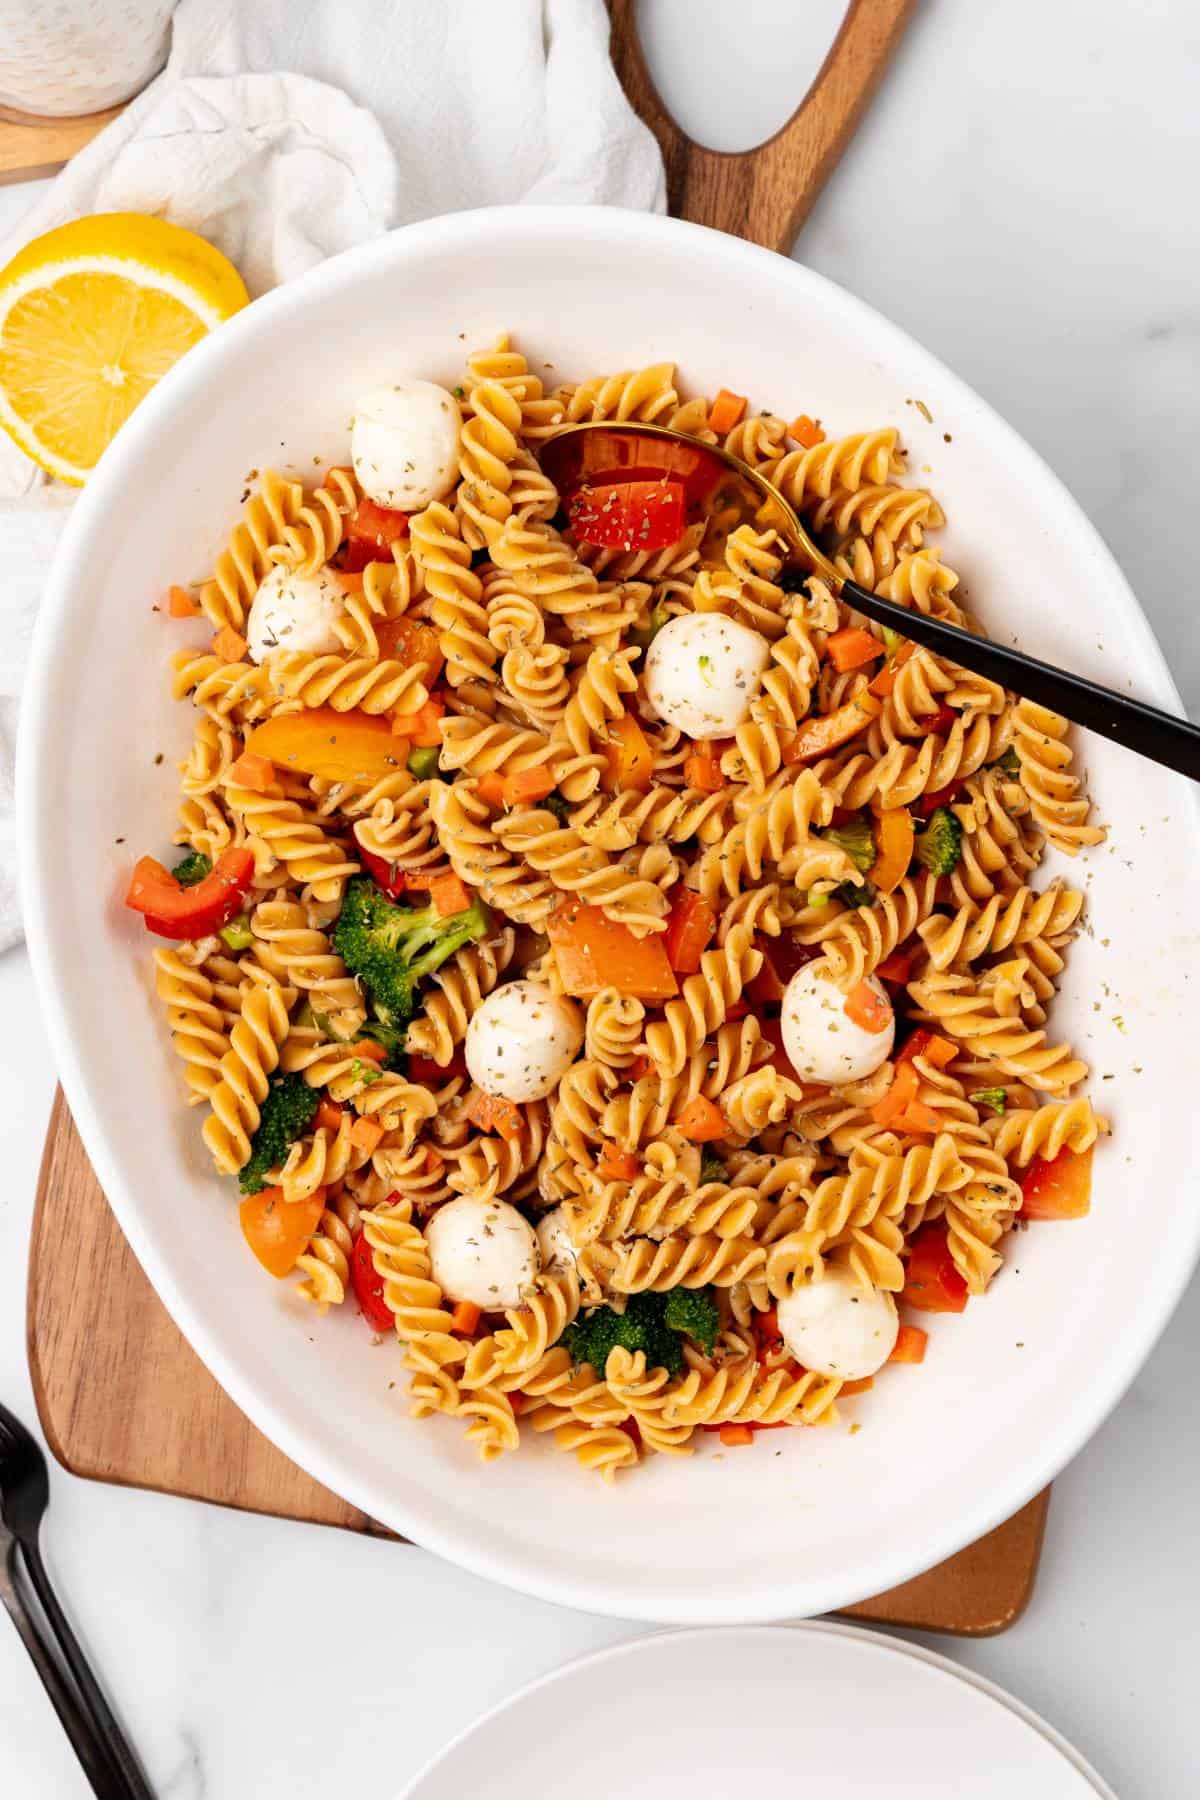 A protein-packed pasta salad served in a white bowl.